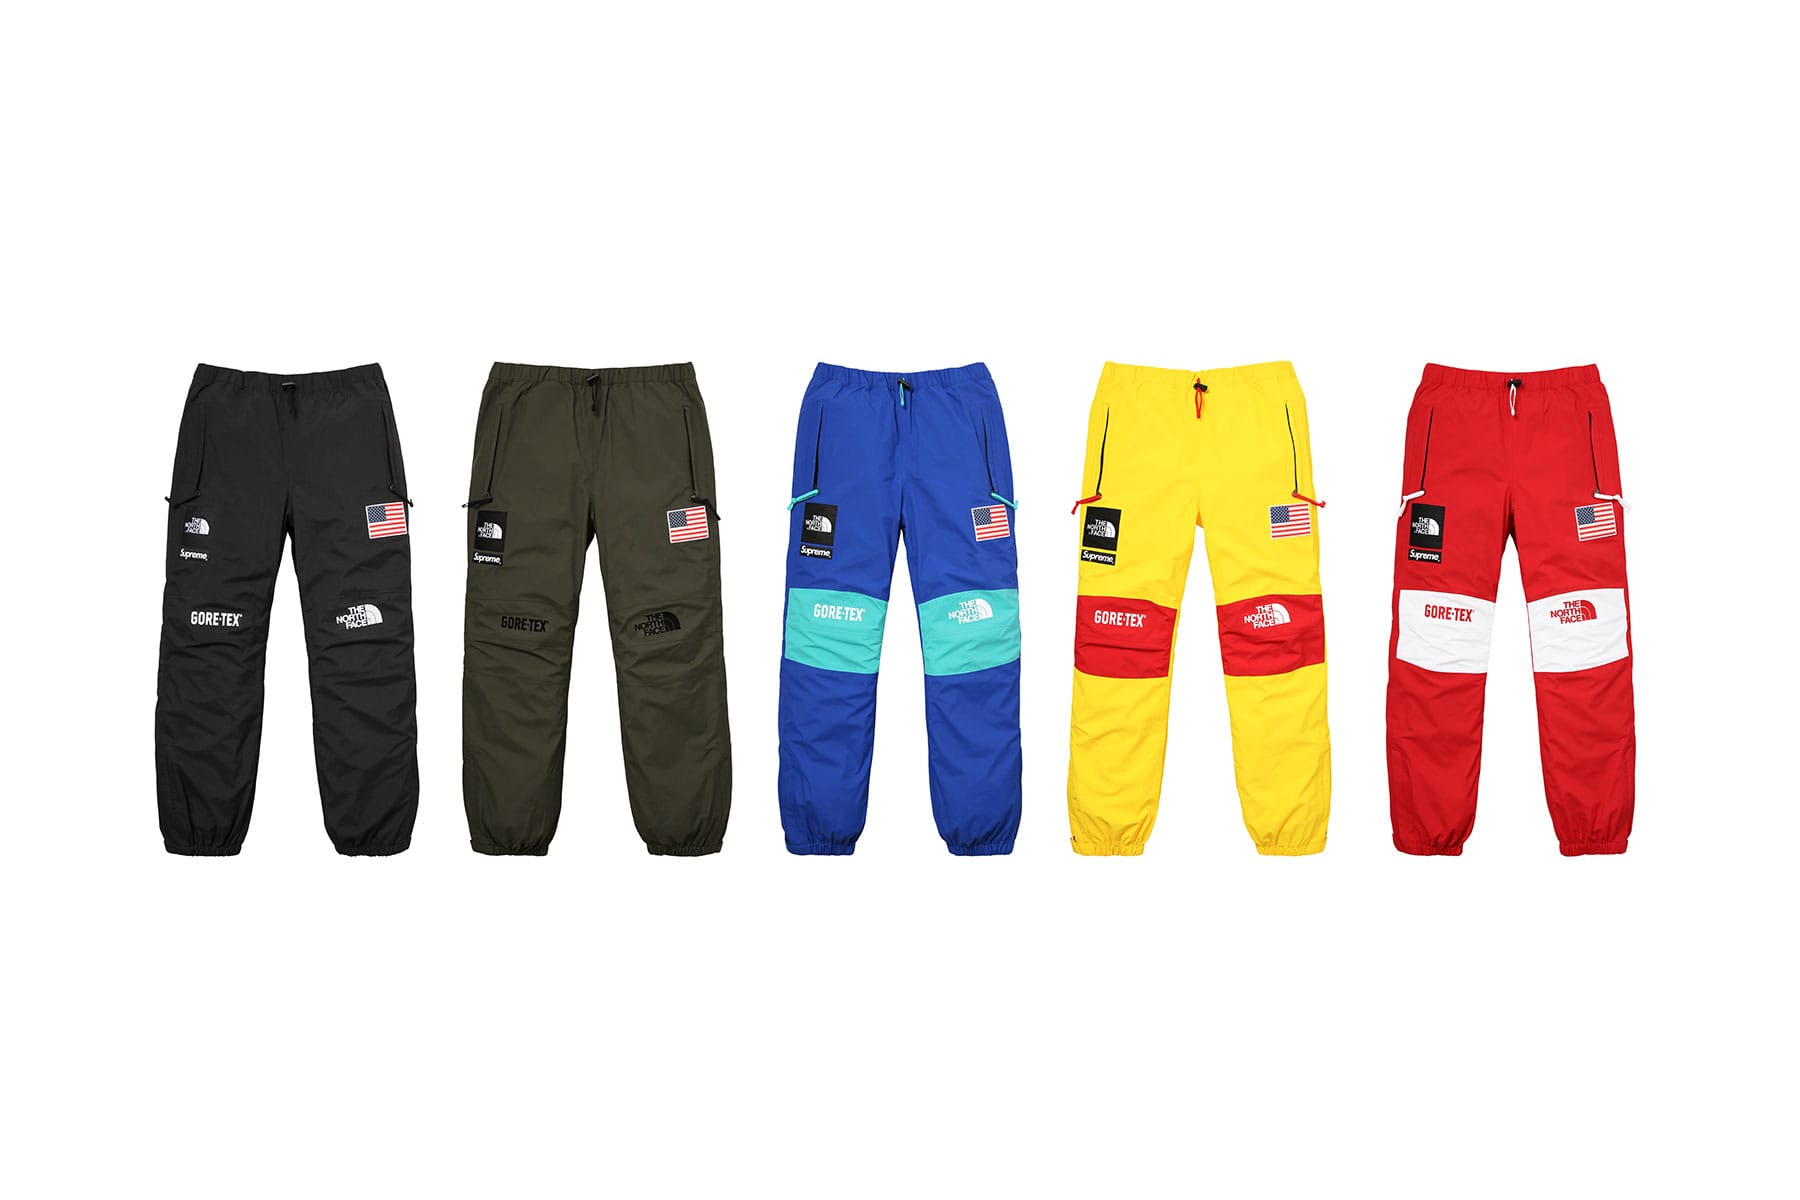 supreme north face expedition pant